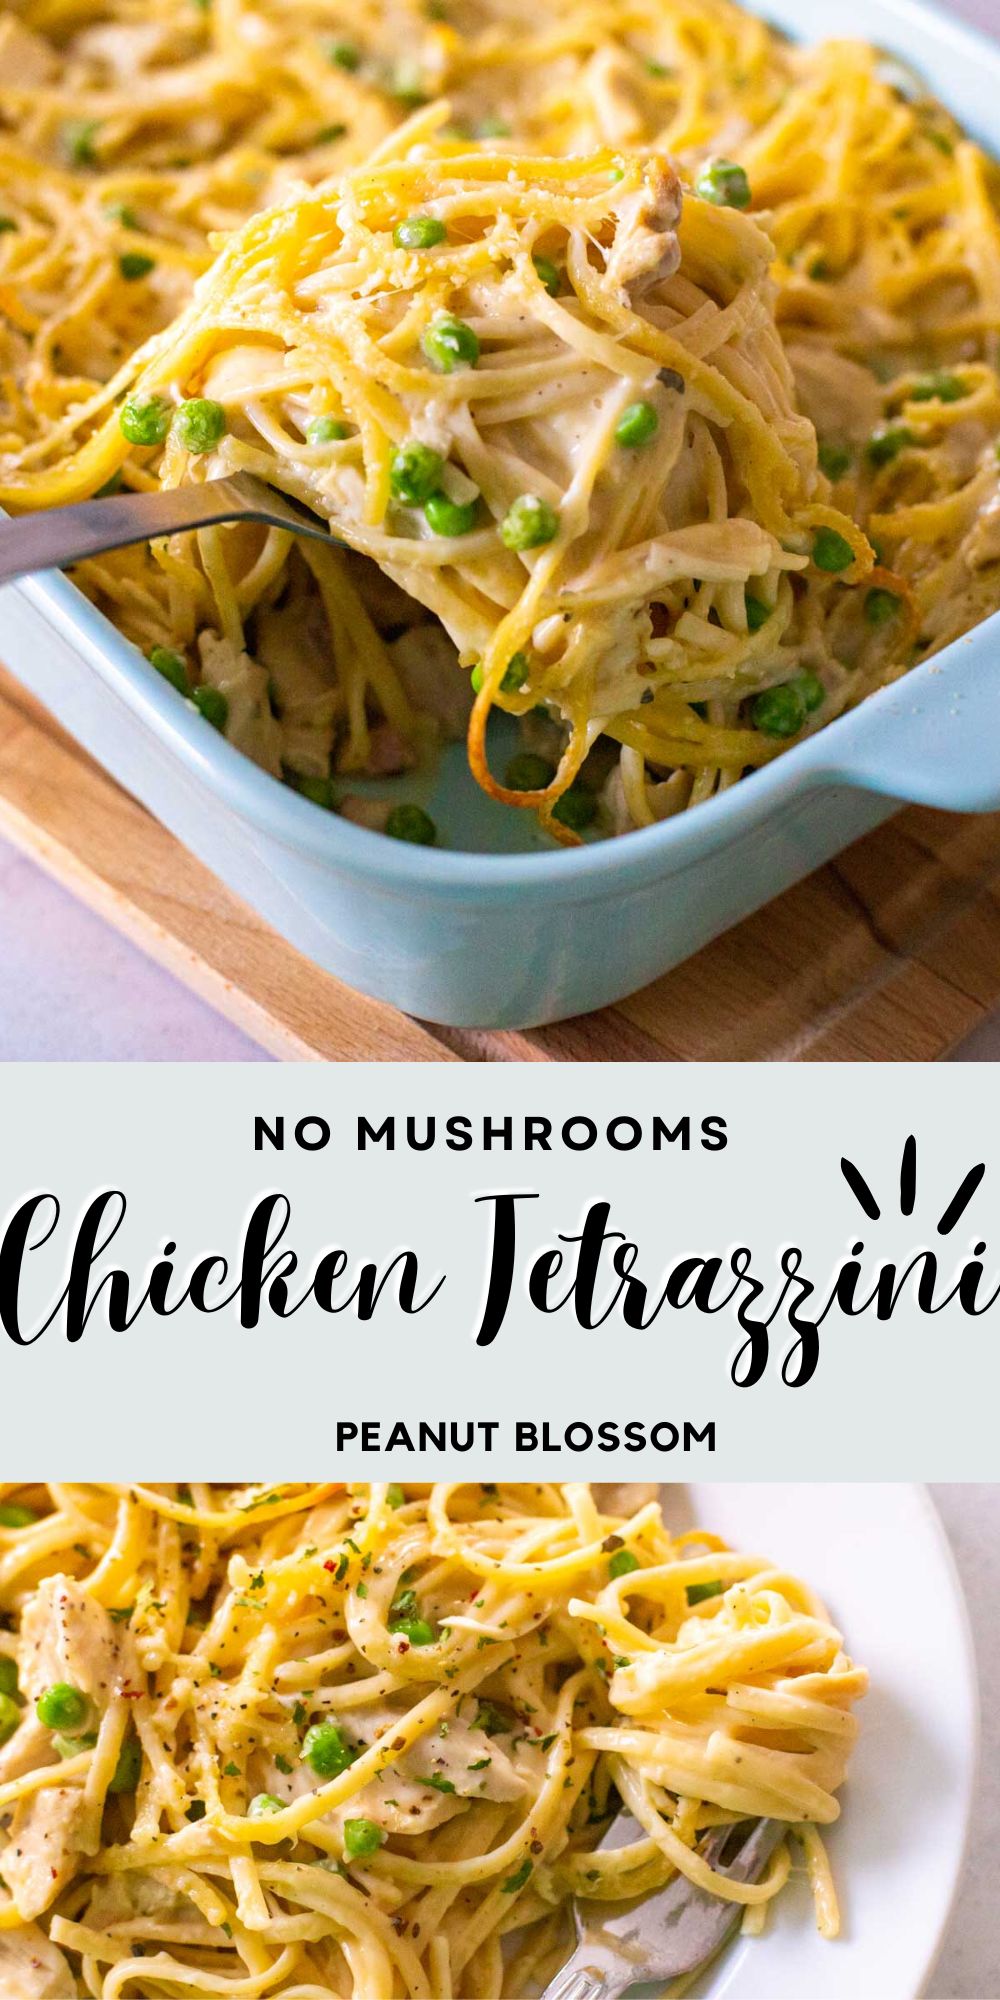 The photo collage shows the chicken tetrazzini with no mushrooms in the casserole dish and on a white plate being served for dinner.